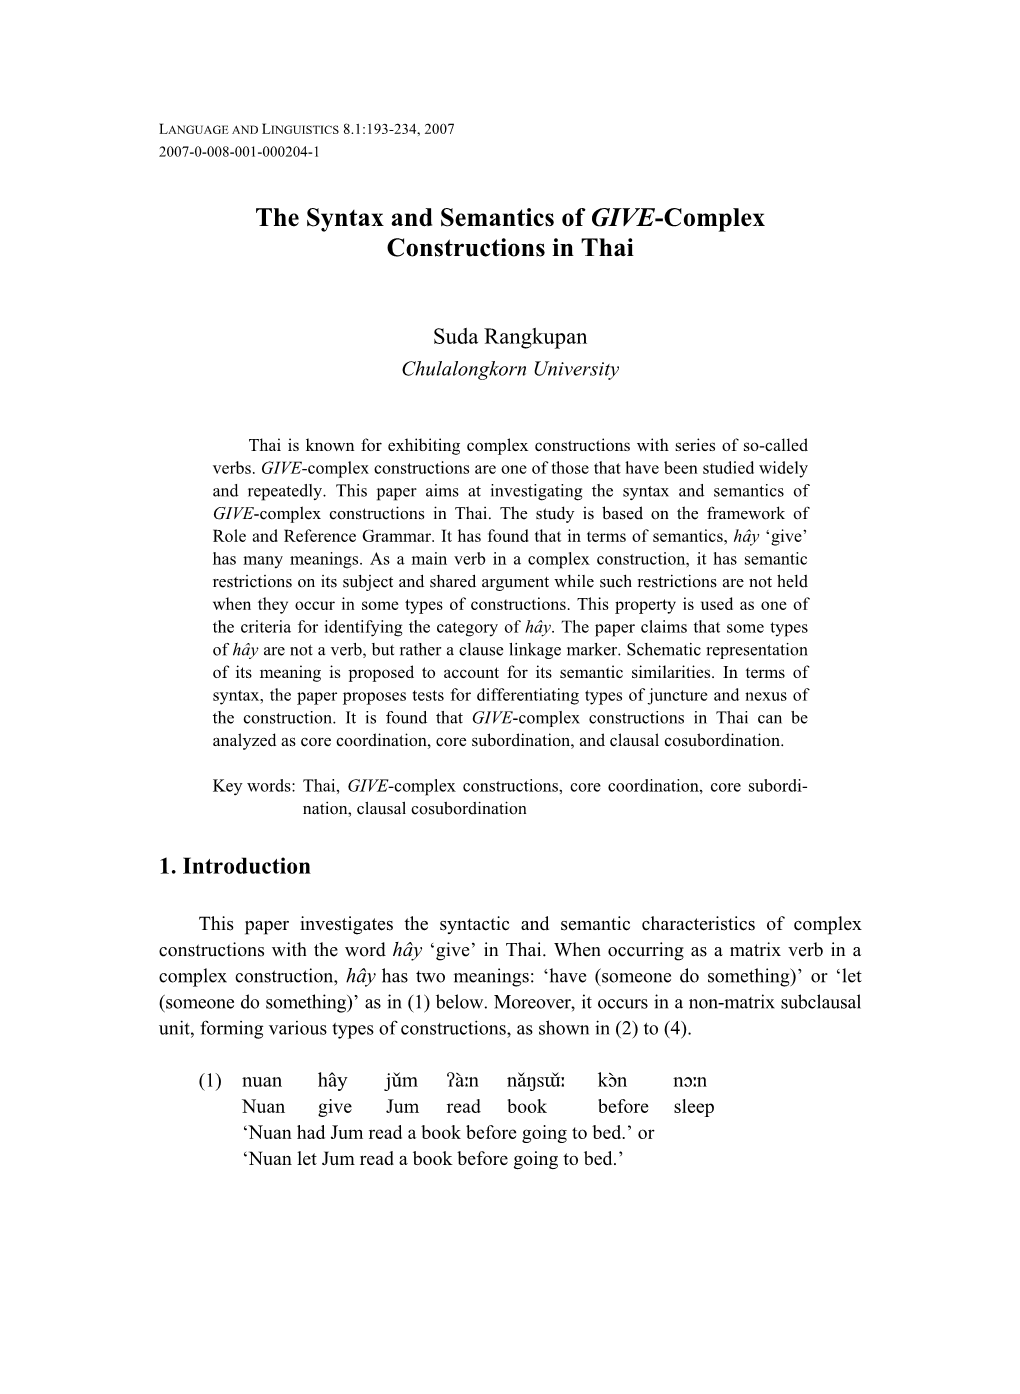 The Syntax and Semantics of GIVE-Complex Constructions in Thai